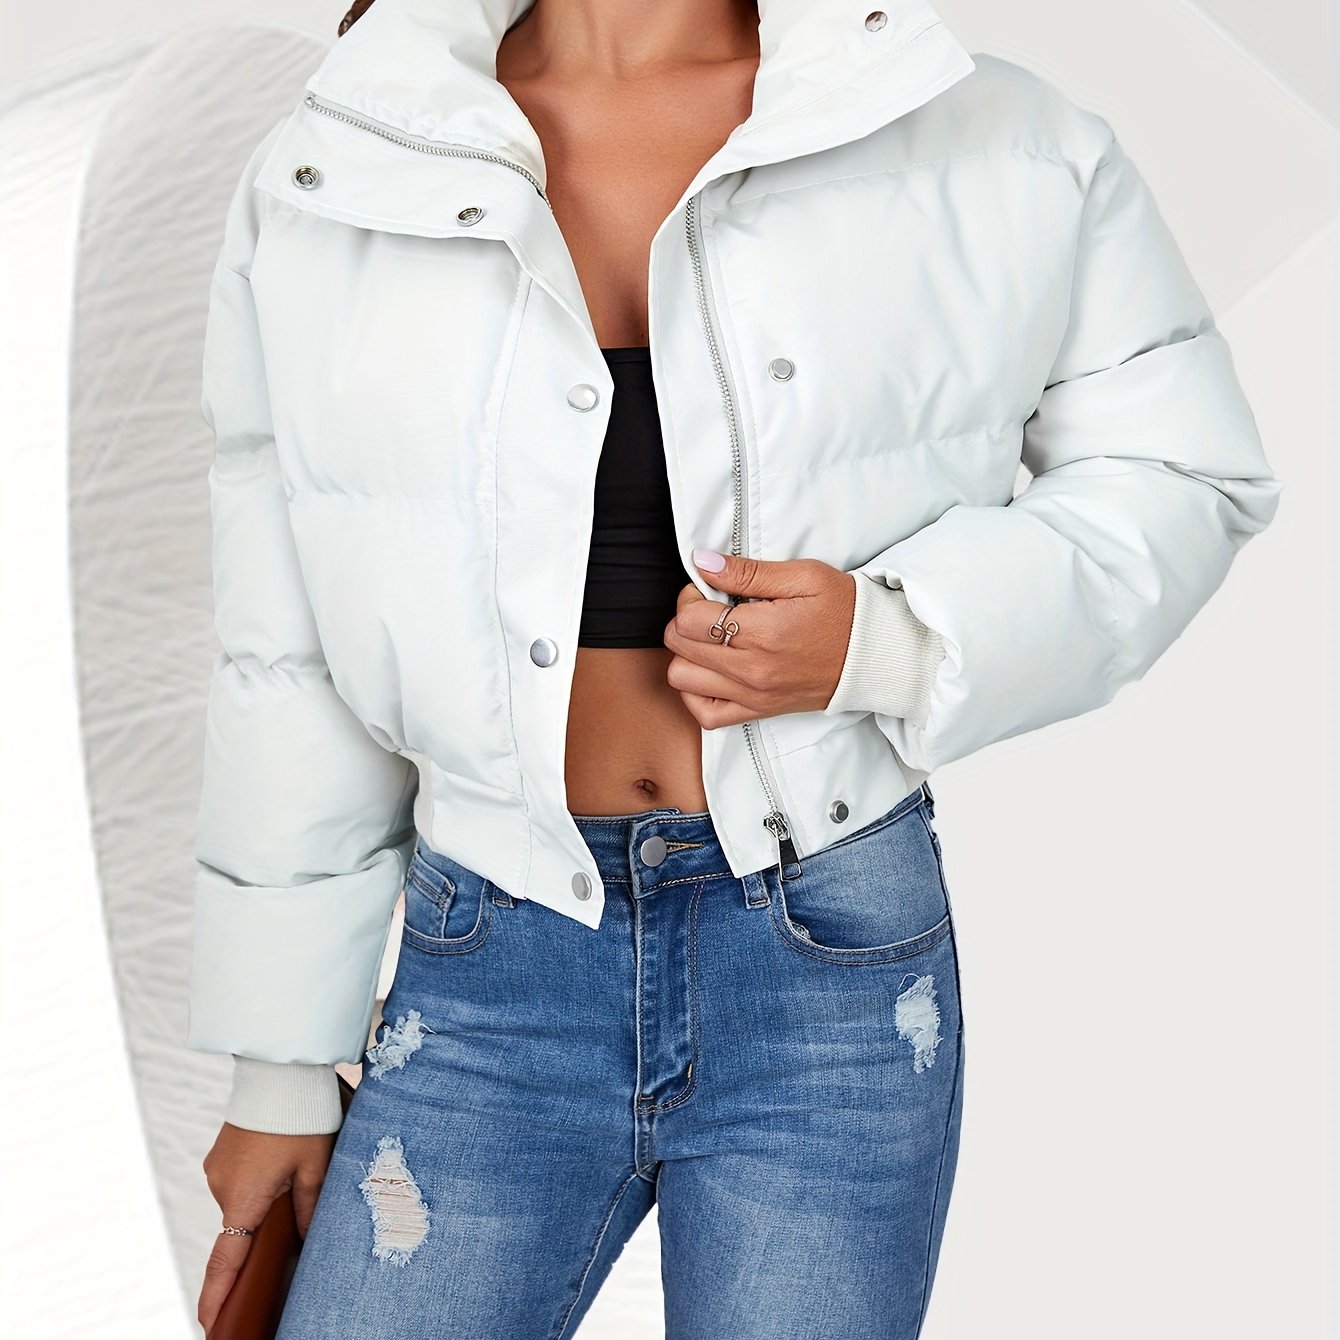 Hooded Crop Parka, Zip Up Solid Casual Jacket For Winter, 45% OFF